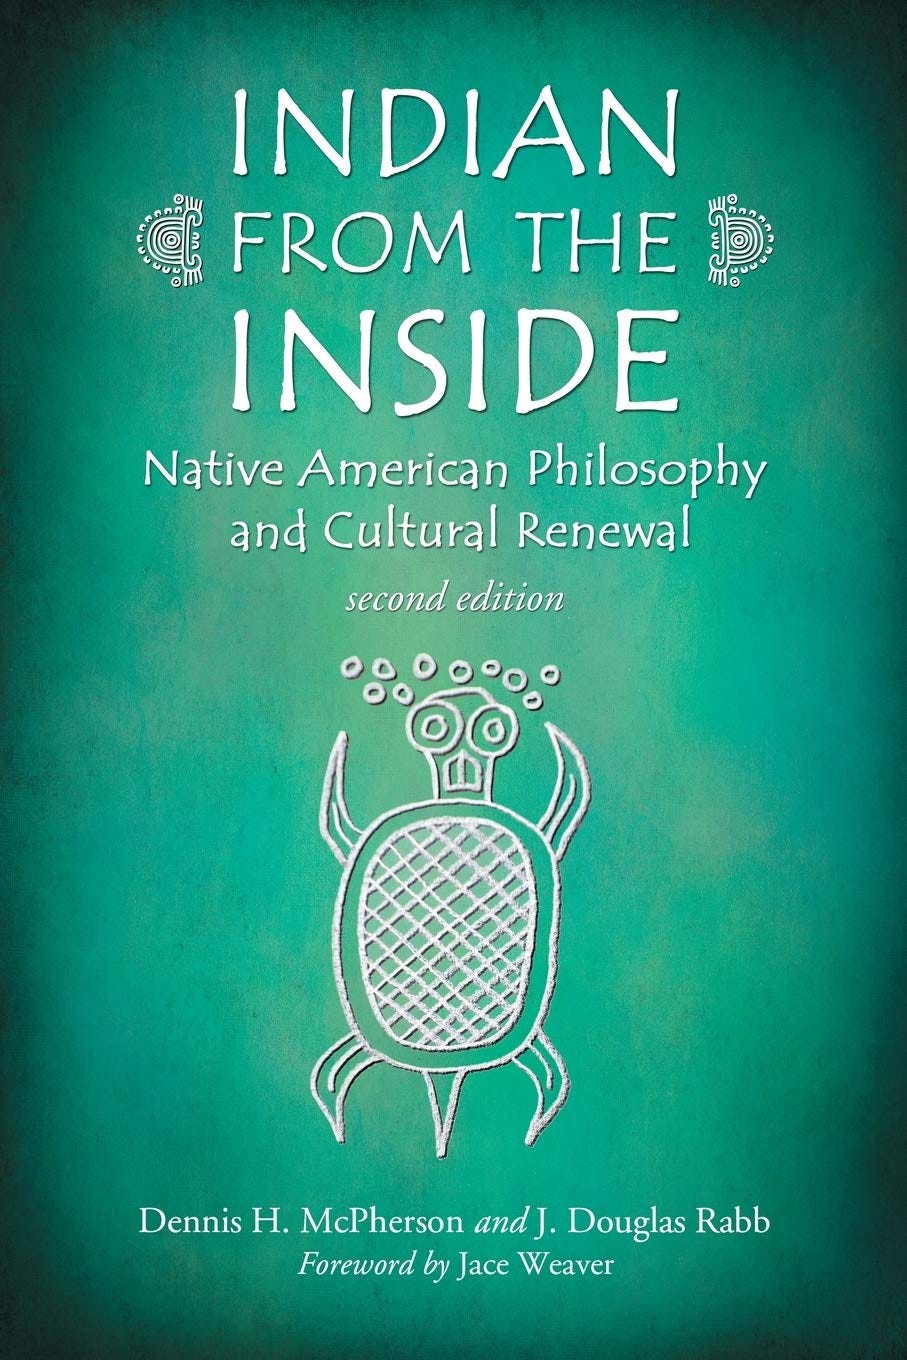 McPherson and Rabb’s Indian From the Inside: Native American Philosophy and Cultural Renewal